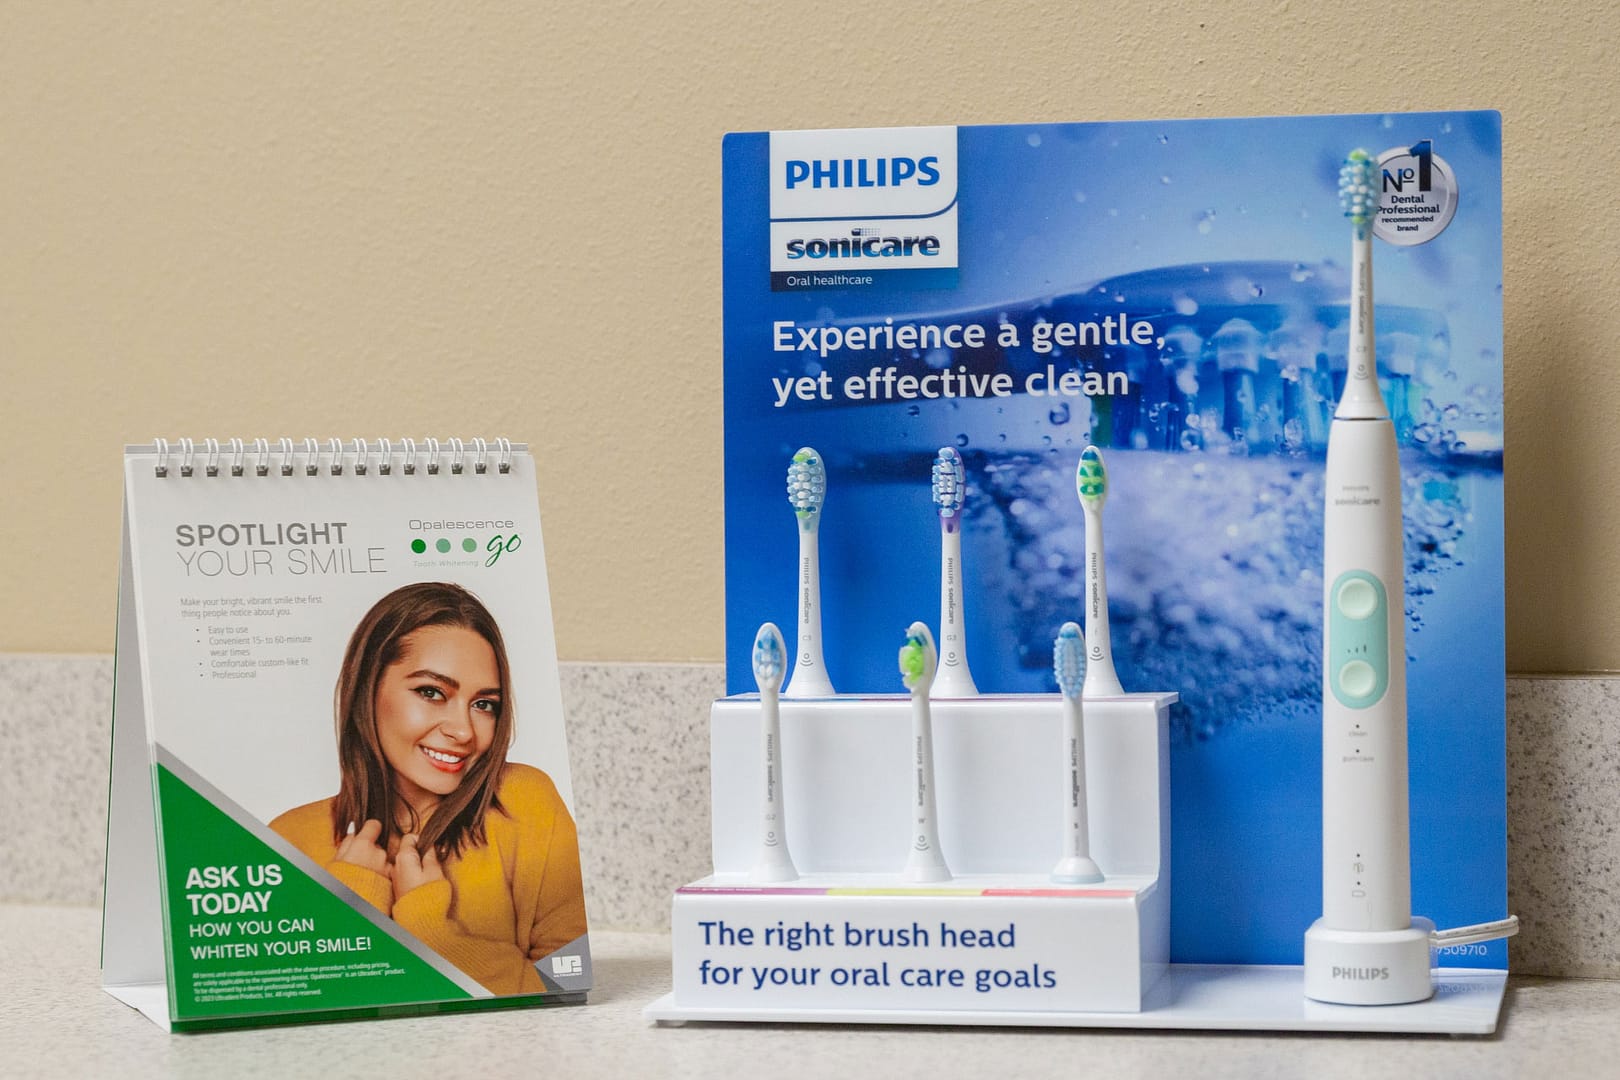 Phillips Sonicare toothbrush display